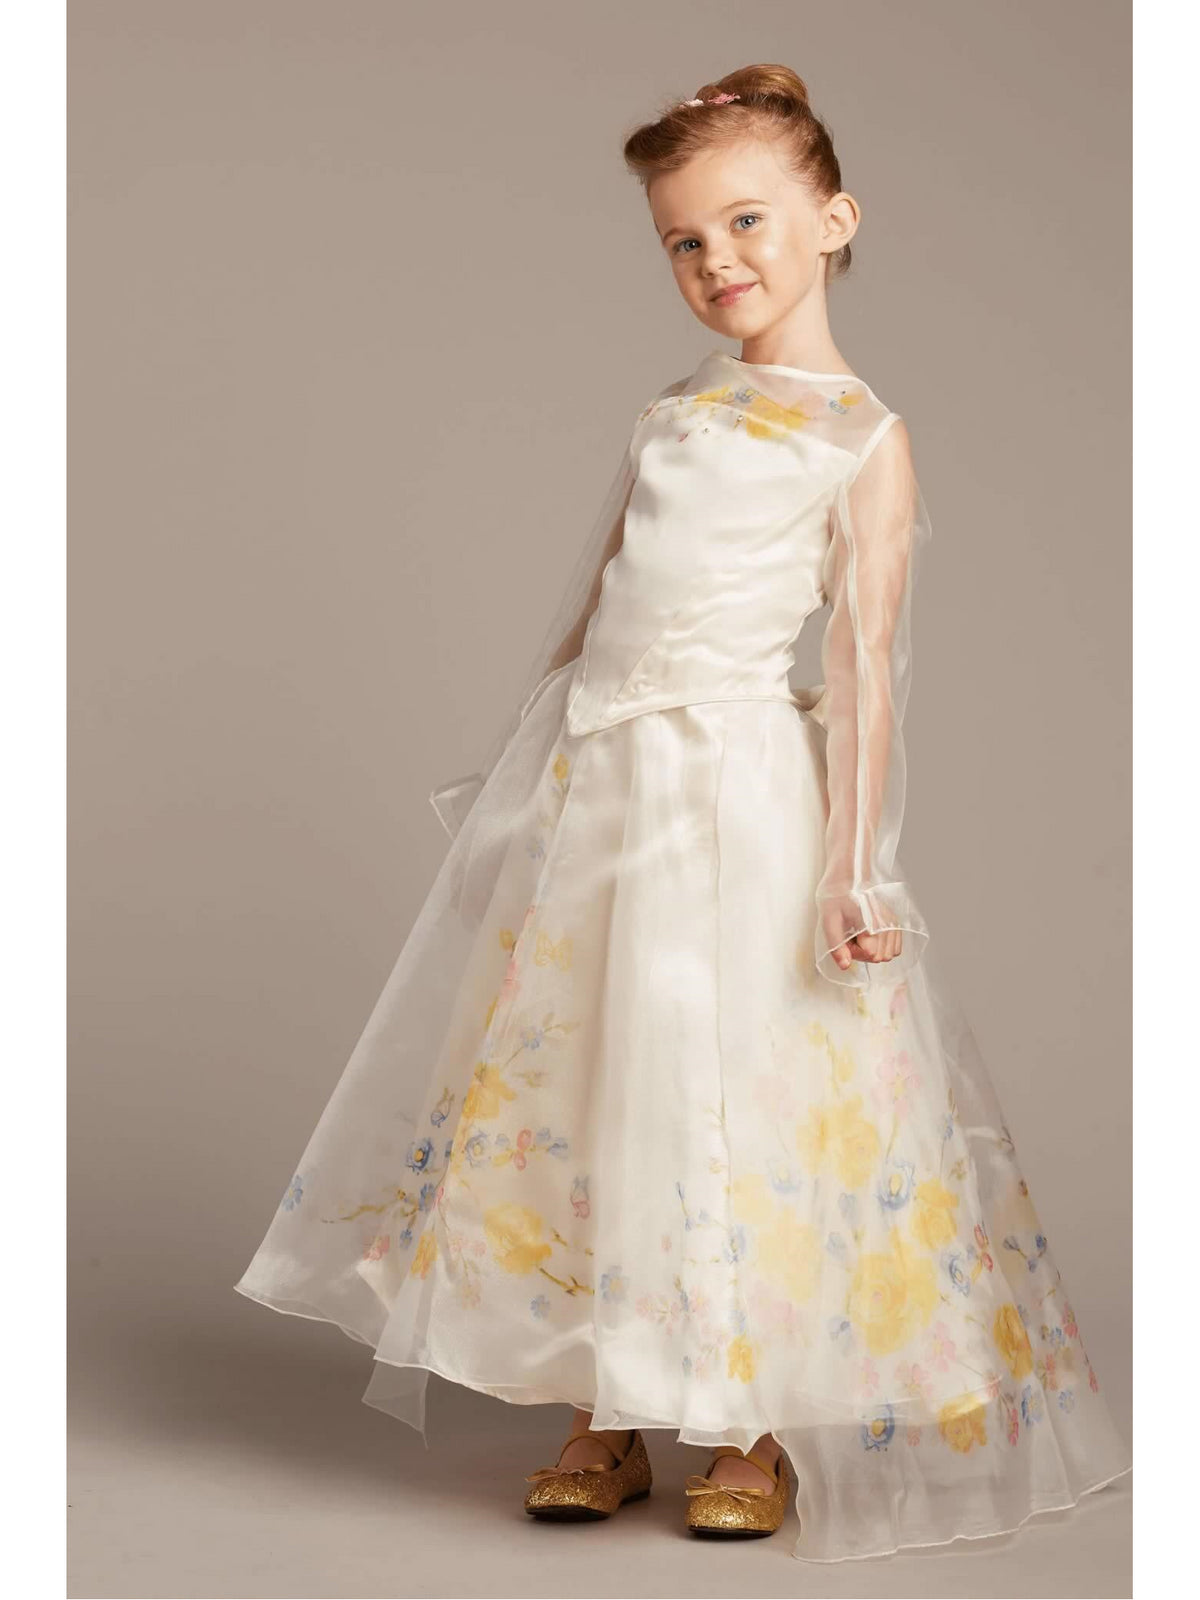  Cinderella Wedding Dress For Girls in the world Don t miss out 